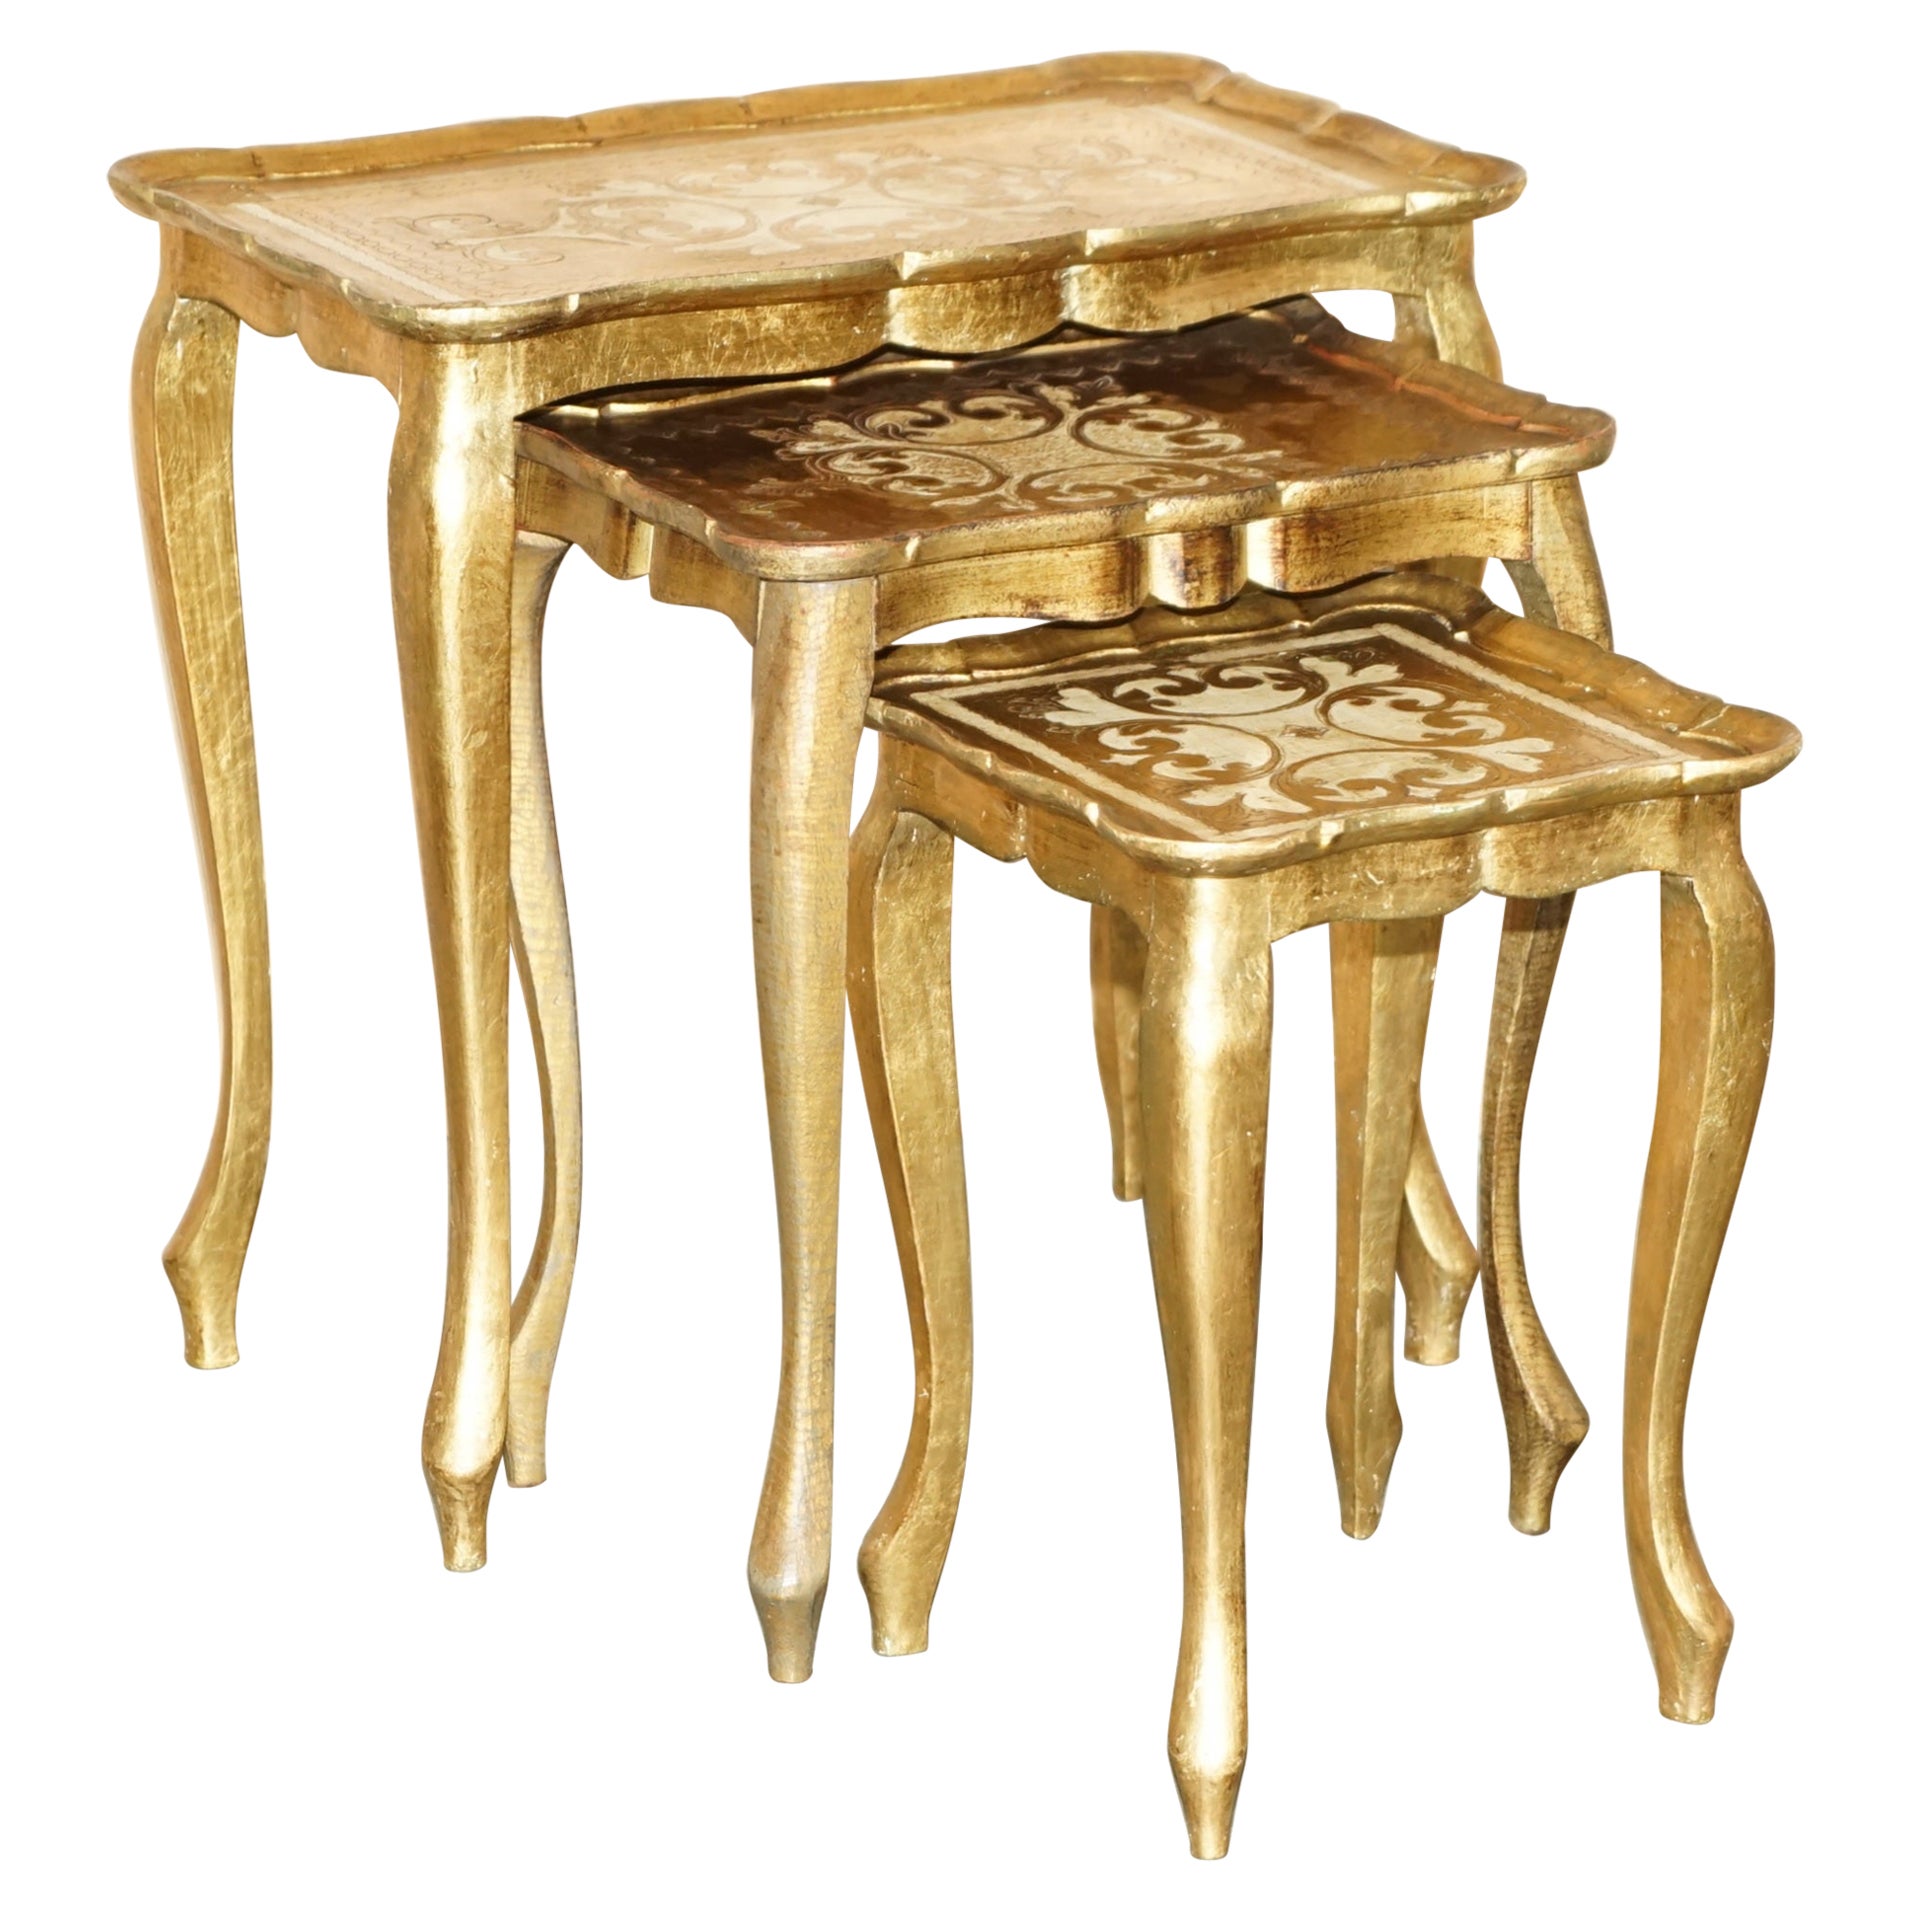 LOVELY ANTiQUE 1930 FLORENTINE VENETIAN HAND PAINTED & GILT NEST OF THREE TABLES For Sale